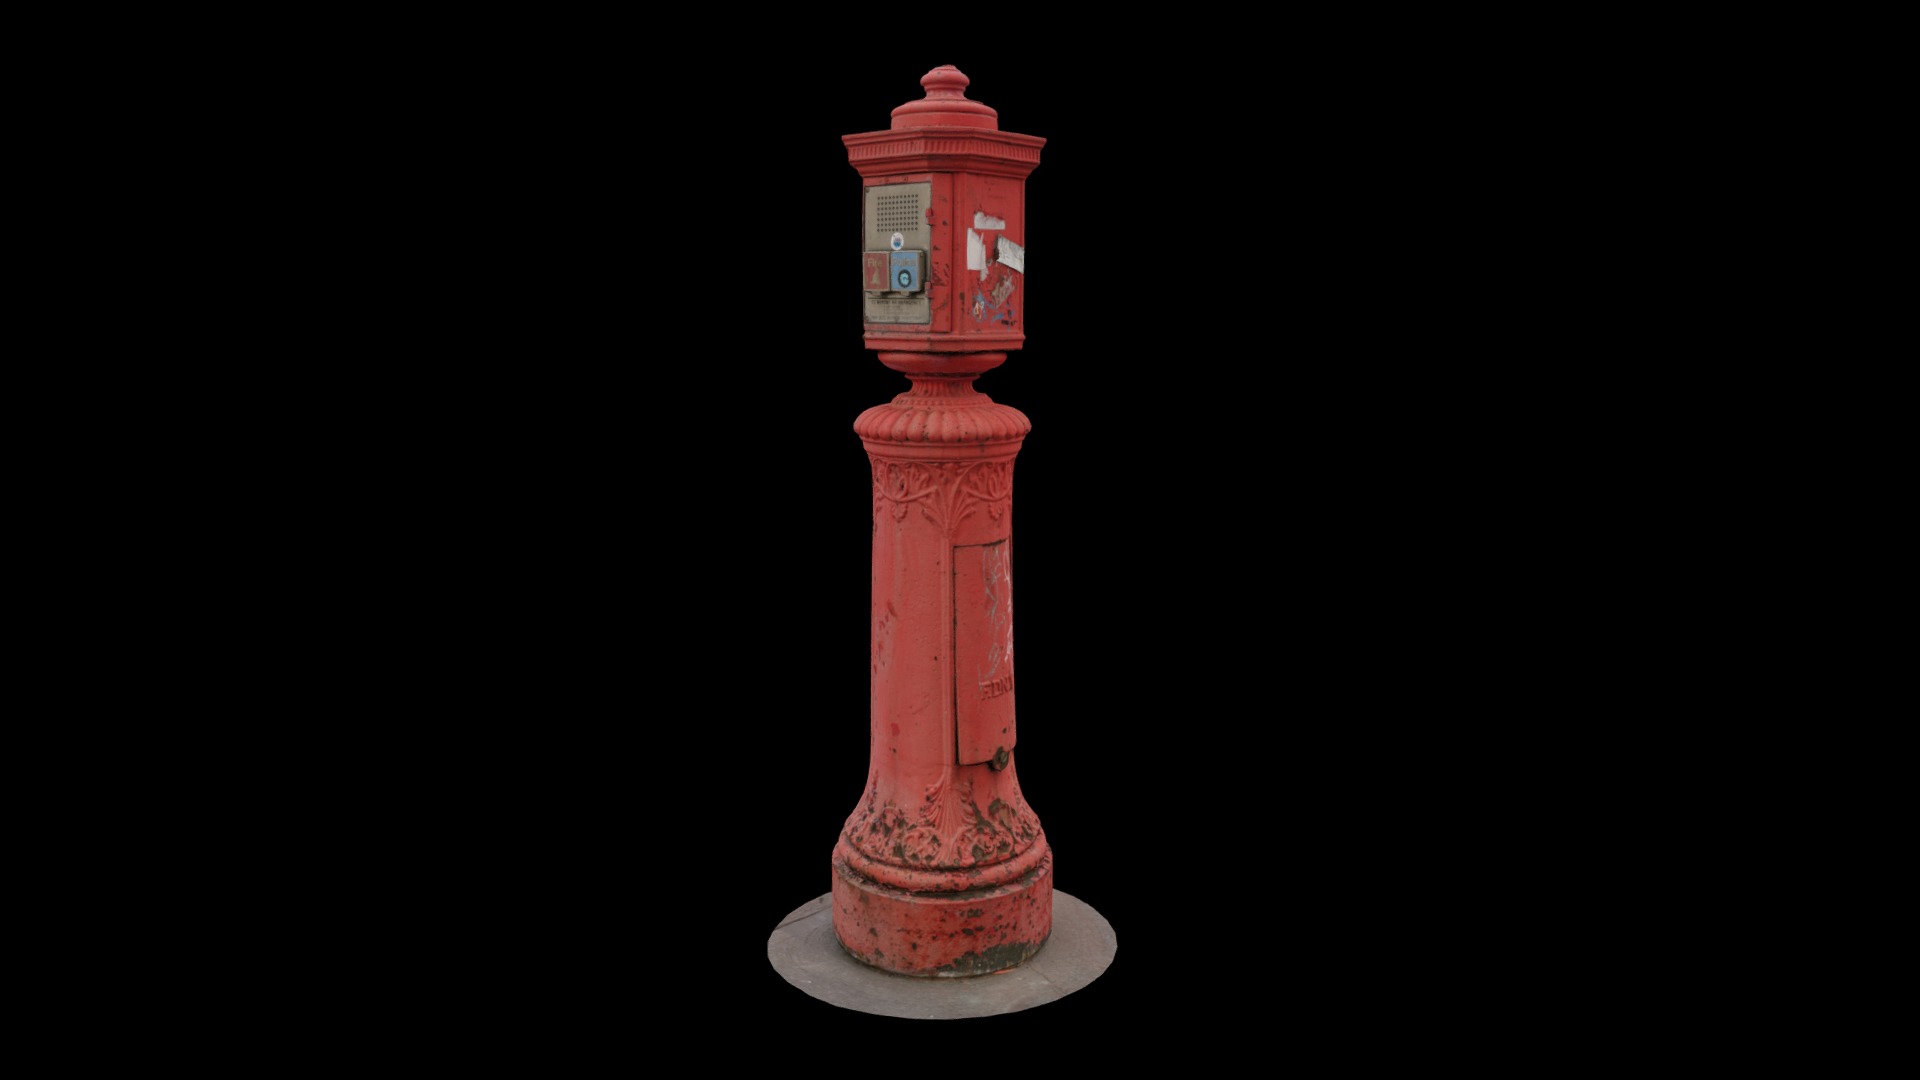 3D model New York Fire Dept. Call Post - This is a 3D model of the New York Fire Dept. Call Post. The 3D model is about a red and white fire hydrant.